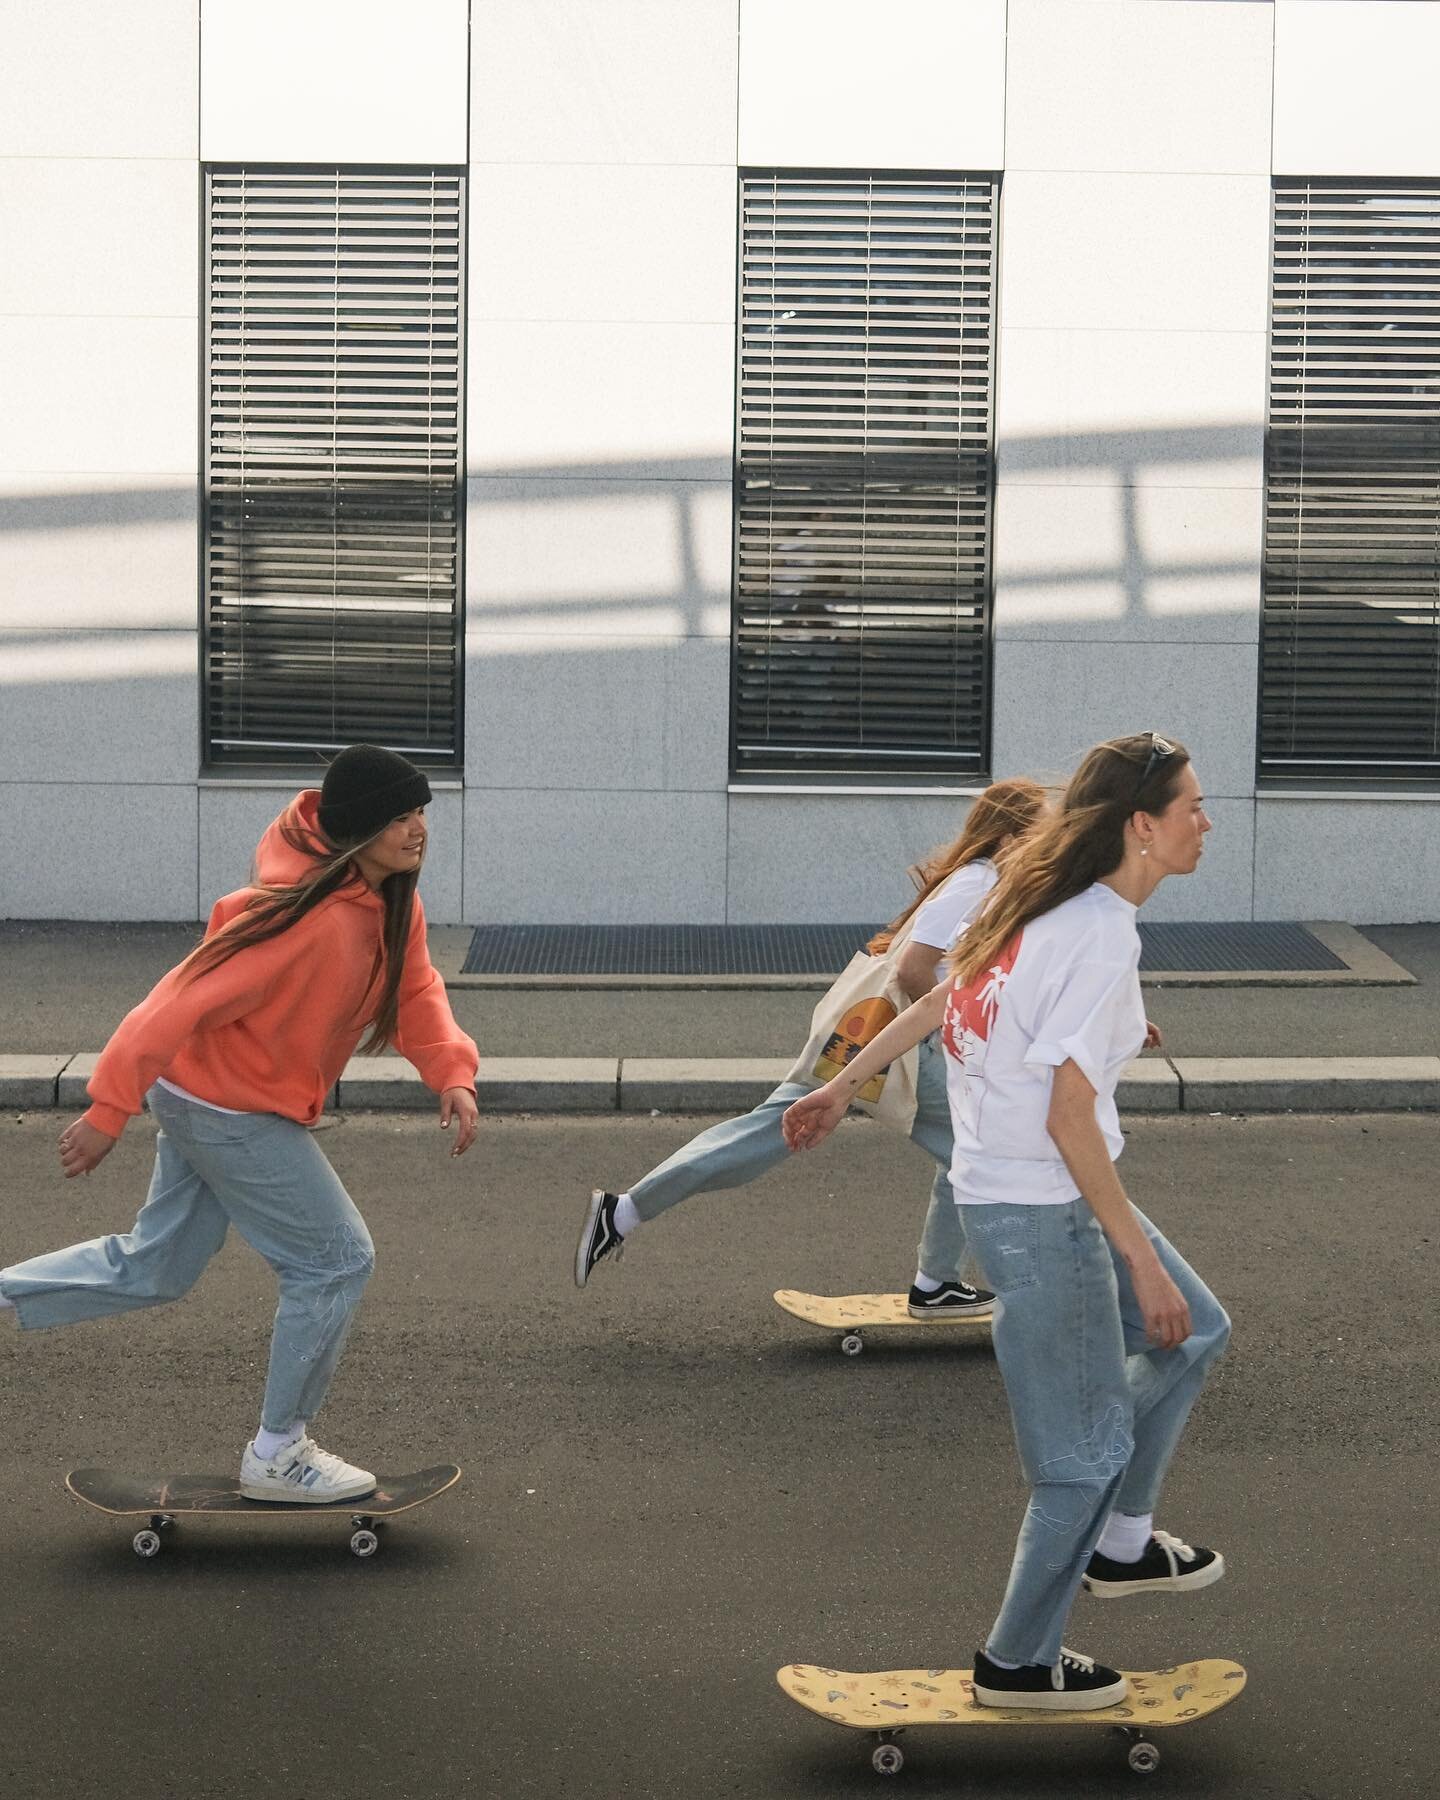 We`re so proud to introduce our exclusive @grlshred_ x @thecavacompany collection dropping online and in all Junkyard stores 25th of May. 🥹💥

In the collection you'll find a hoodie, t-shirt, jeans, skateboards and one of a kind griptapes. 🛹

With 